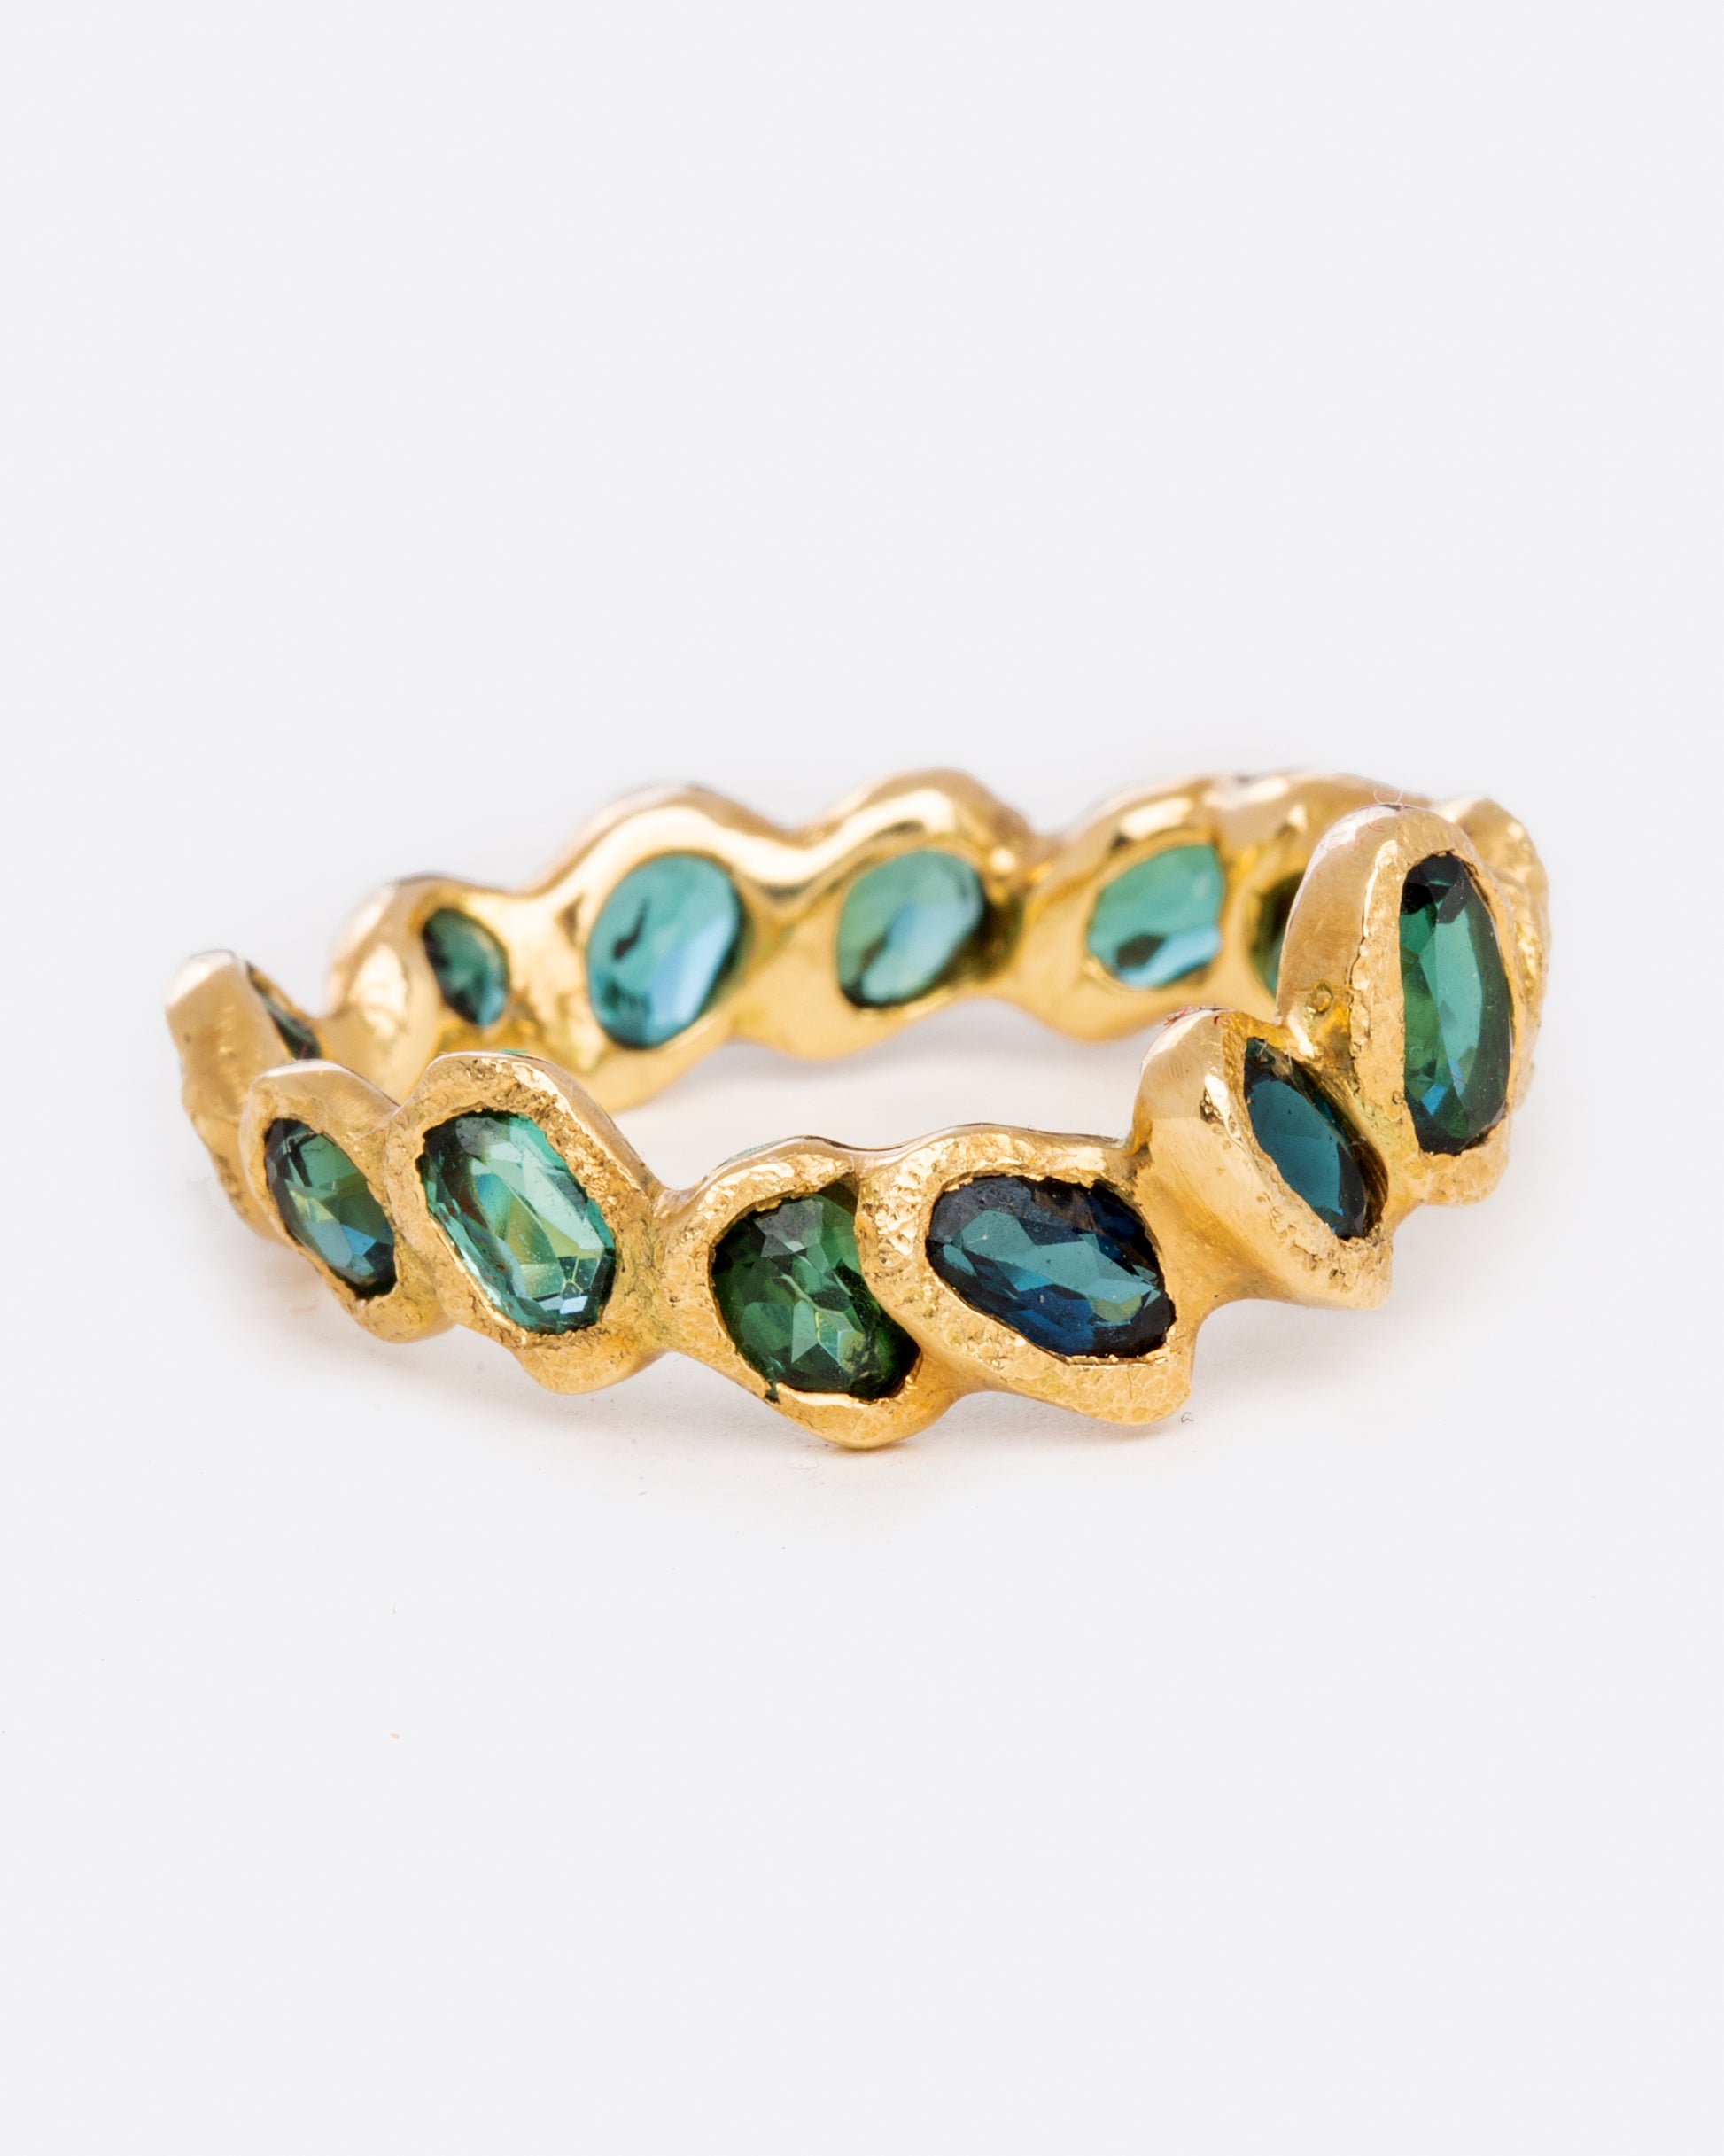 A yellow gold eternity band ring with oval blue green tourmalines, each set facing slightly askew.